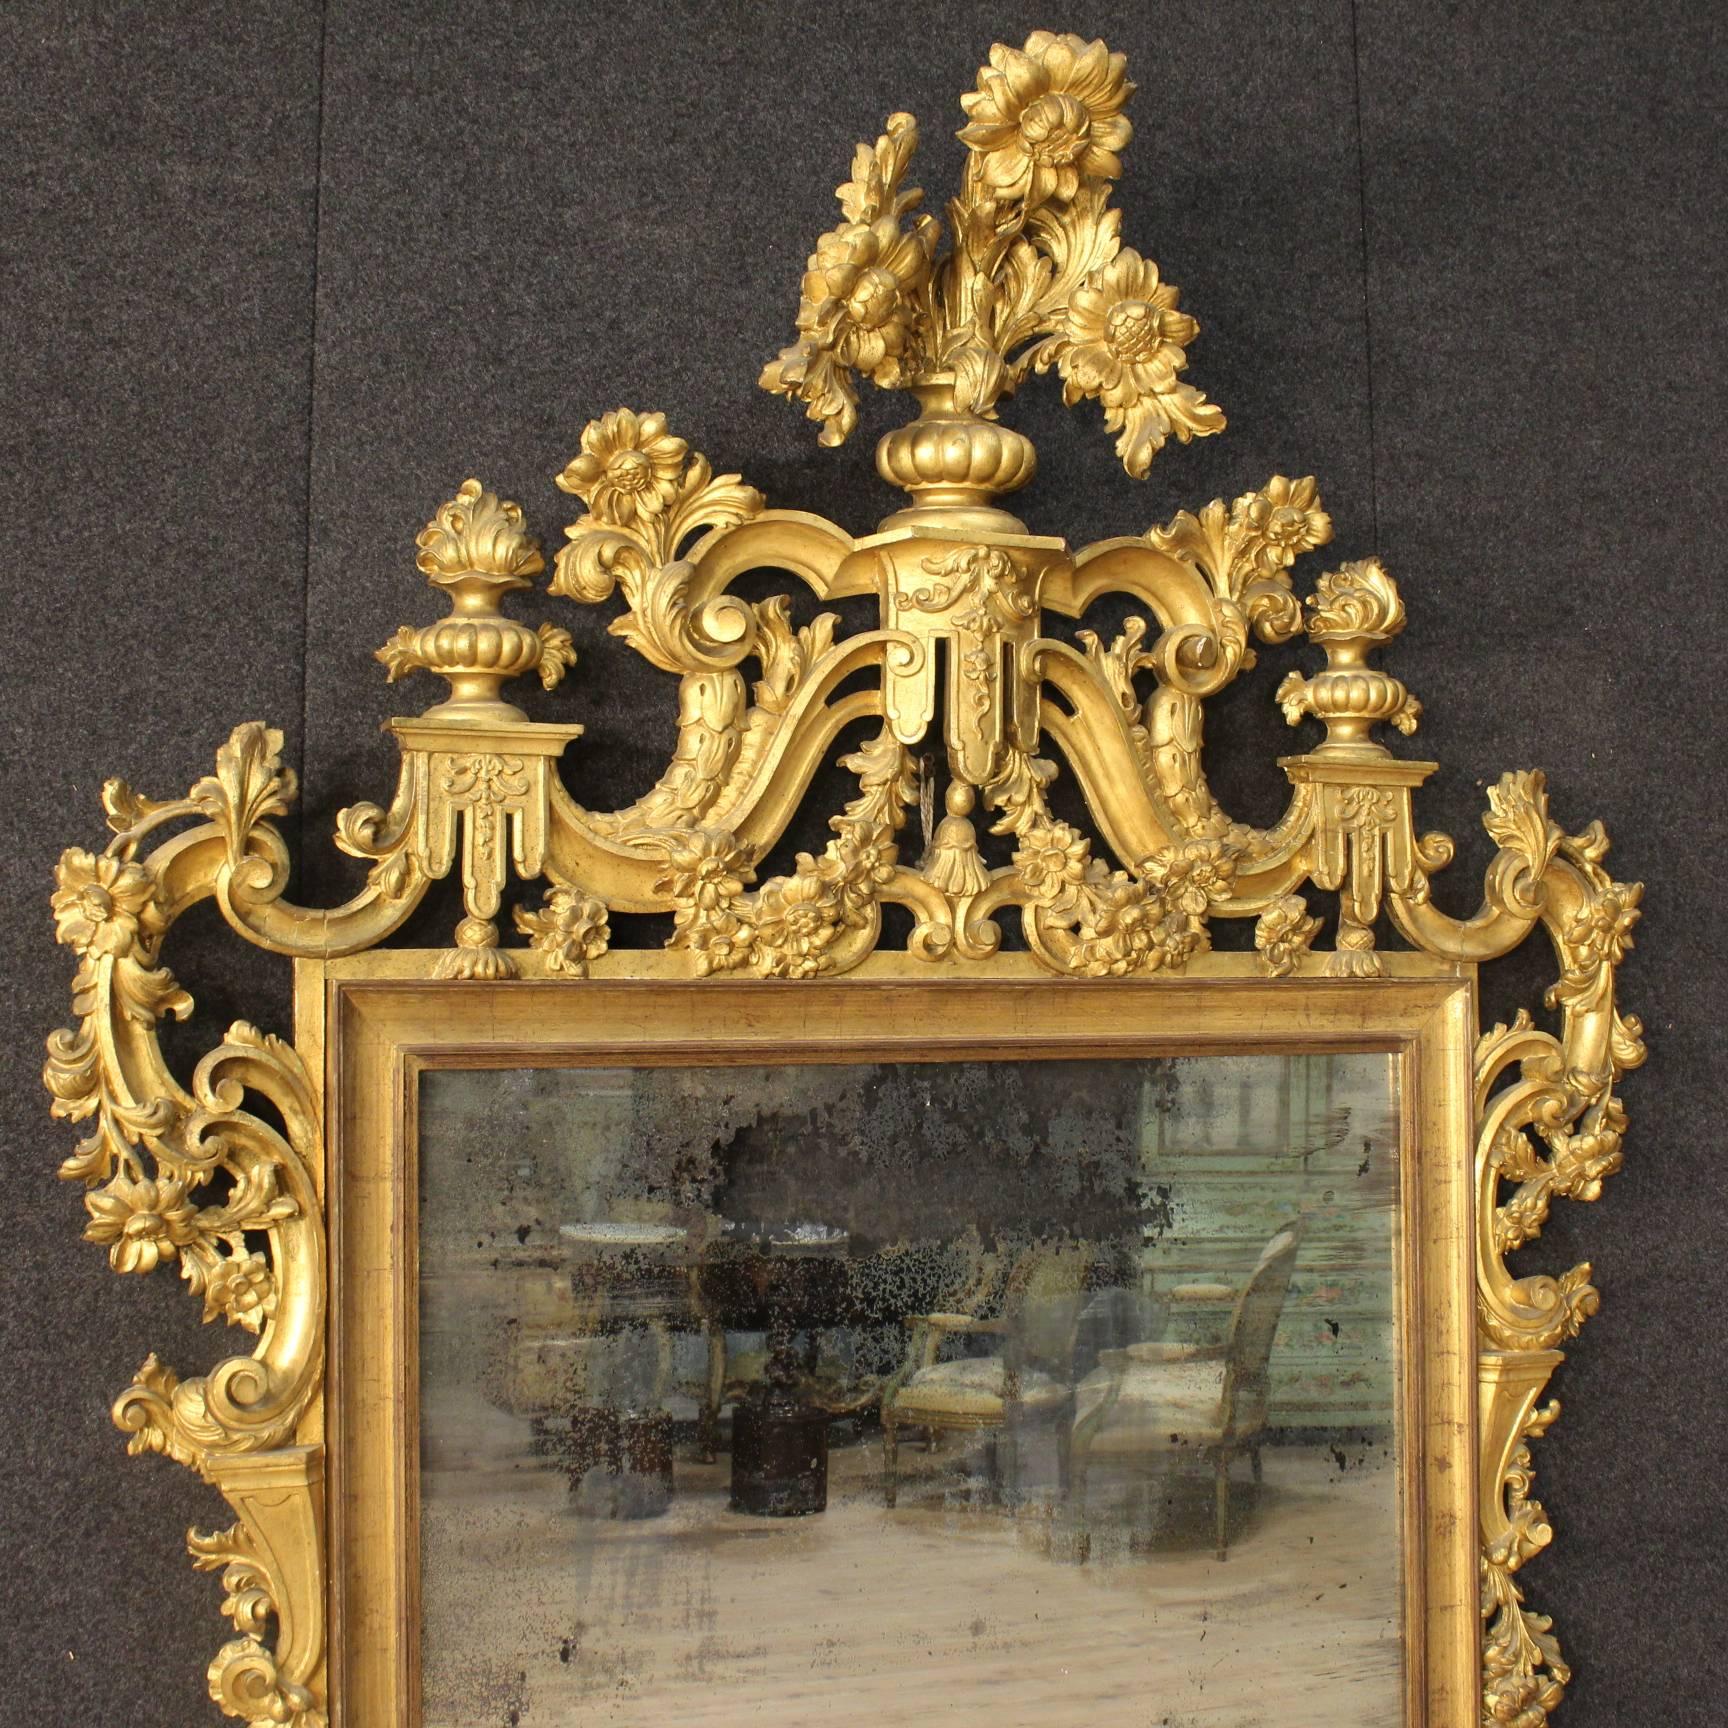 Spectacular Italian mirror of the 20th century. Furniture made by richly carved and gilded wood of great impact and beautiful decoration. Salon mirror ideal be placed on a chest of drawers, console table or bureau of fabulous decor. Mirror not